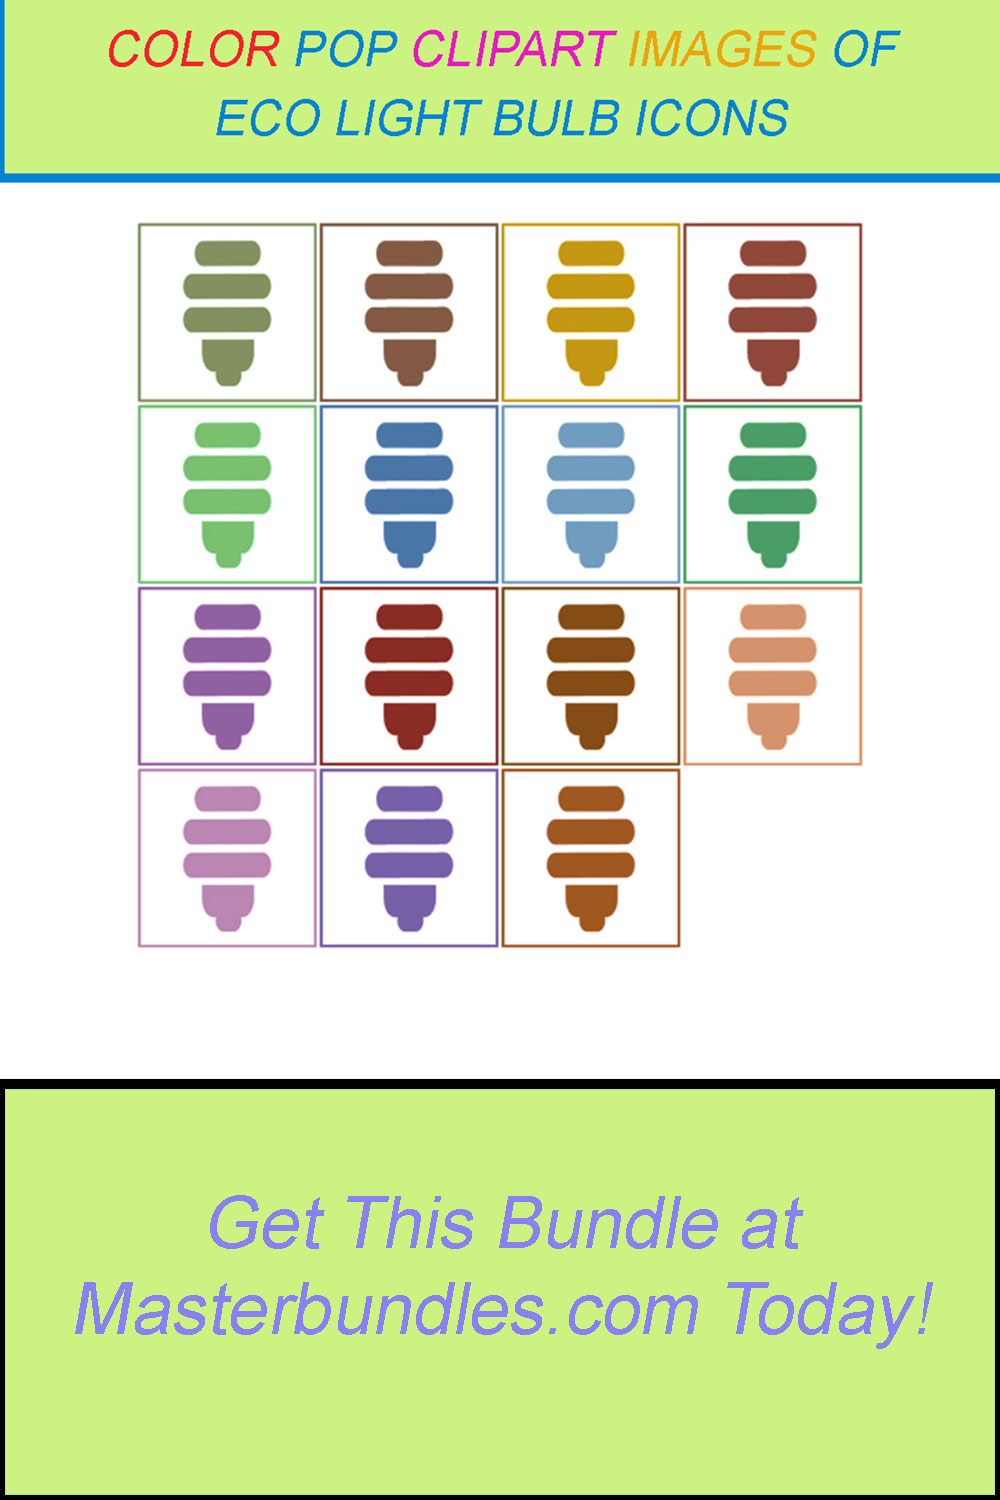 15 COLOR POP CLIPART IMAGES OF ECO LIGHT BULB ICONS pinterest preview image.